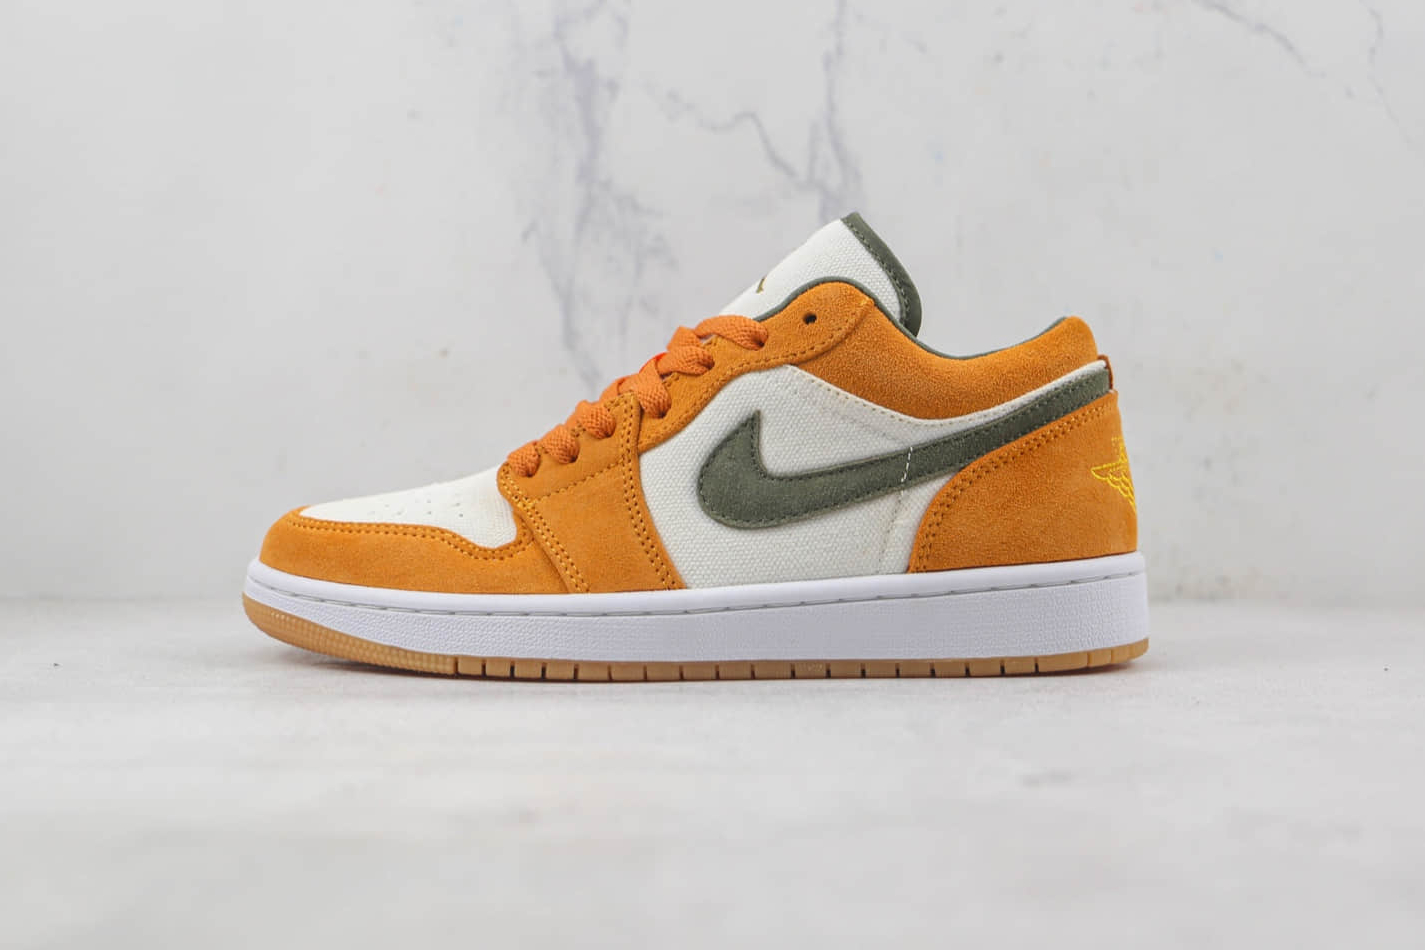 Air Jordan 1 Low SE 'Light Curry' DH6931-102: Premium Sneaker with a Distinctive Style